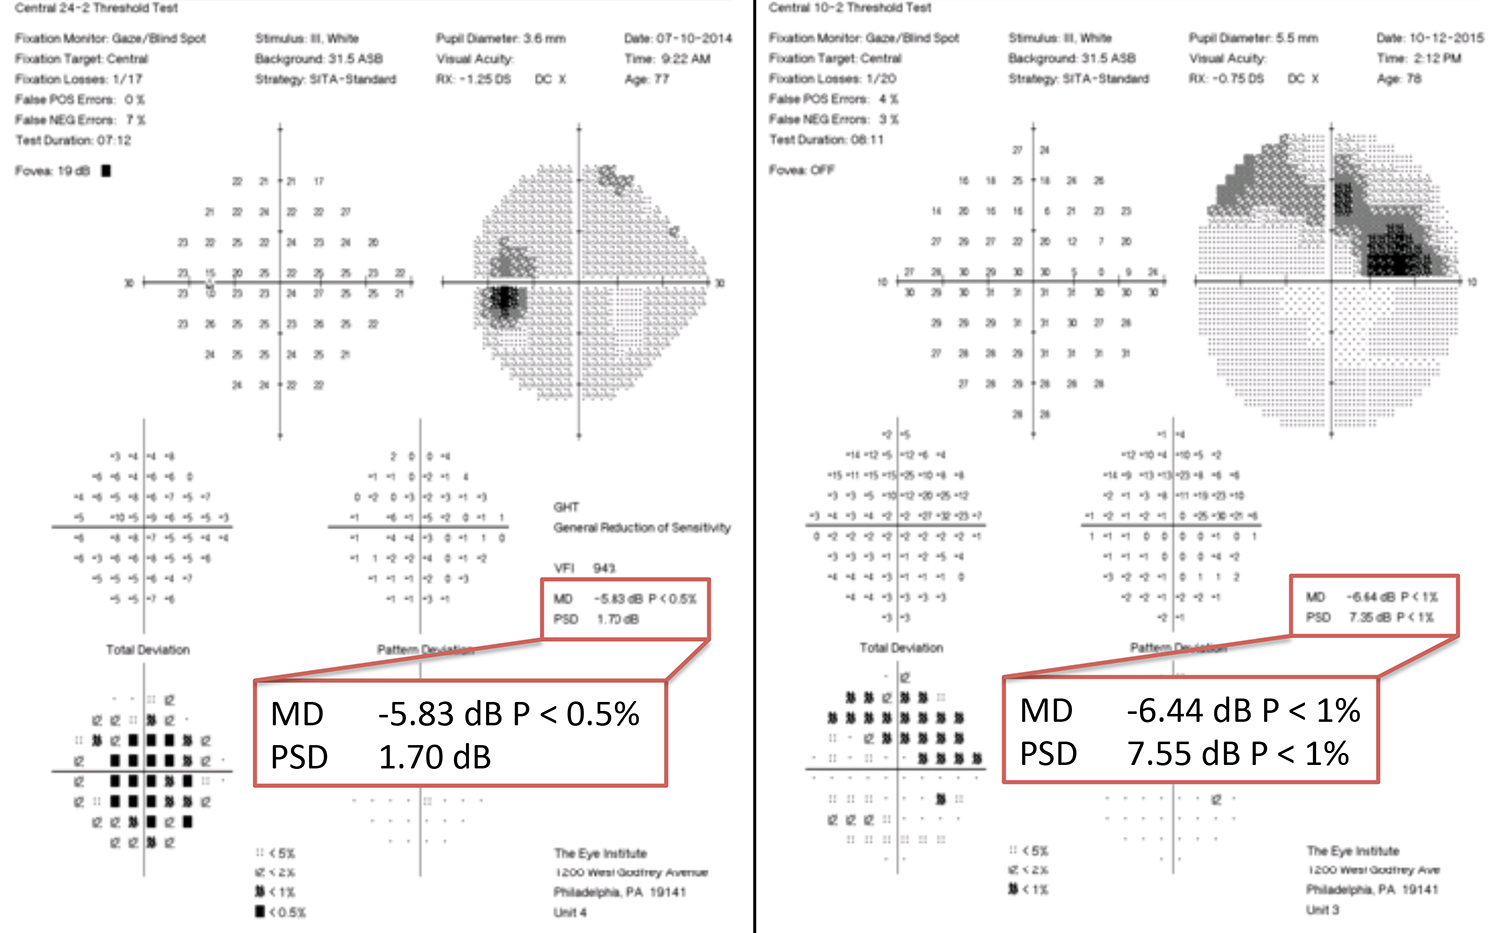 In many scenarios, 10-2 VF testing (right) can be more sensitive than 24-2 (left).